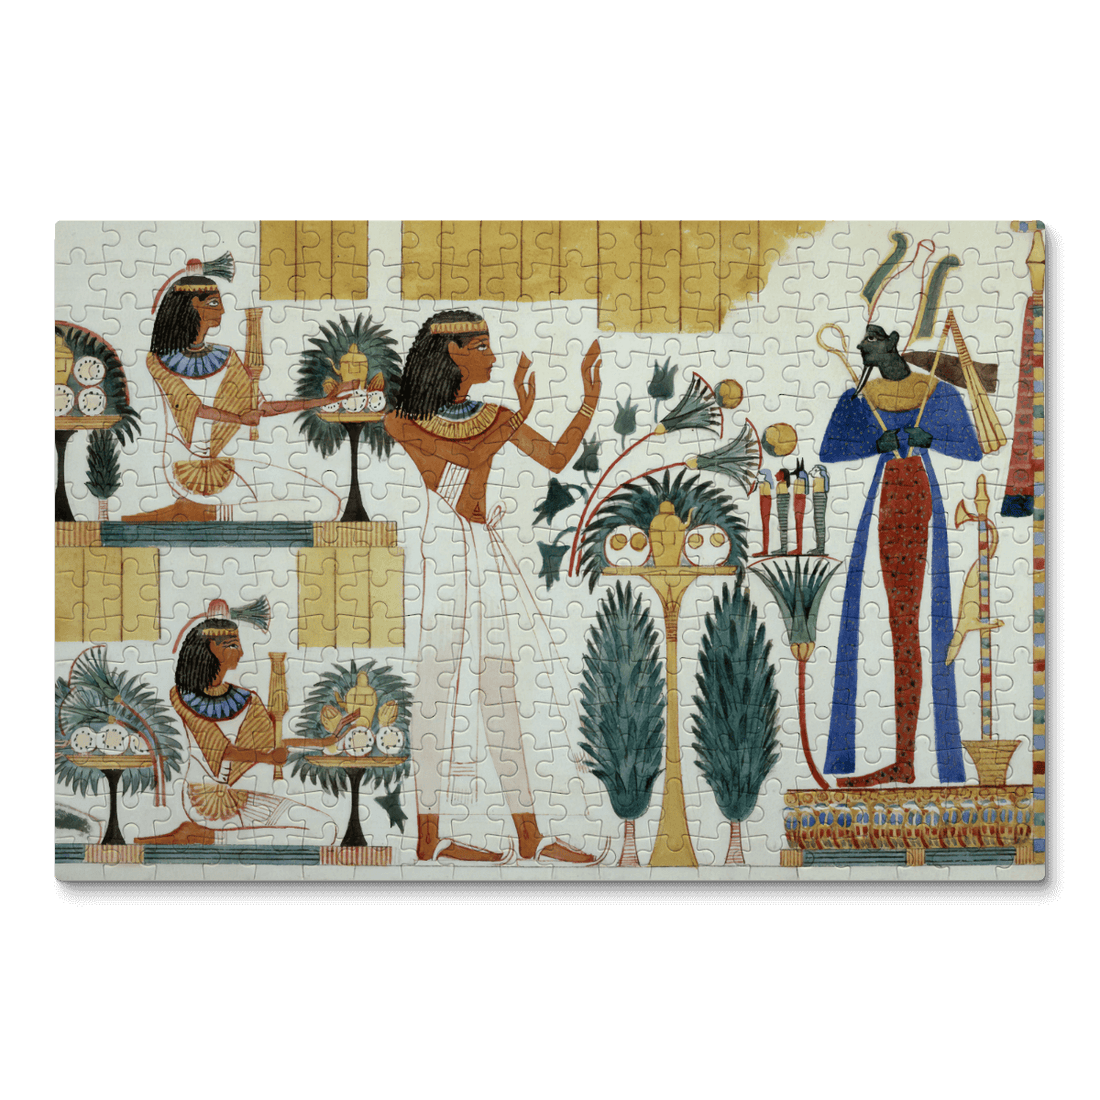 A puzzle with ancient egyptian painting and hieroglyphs on it